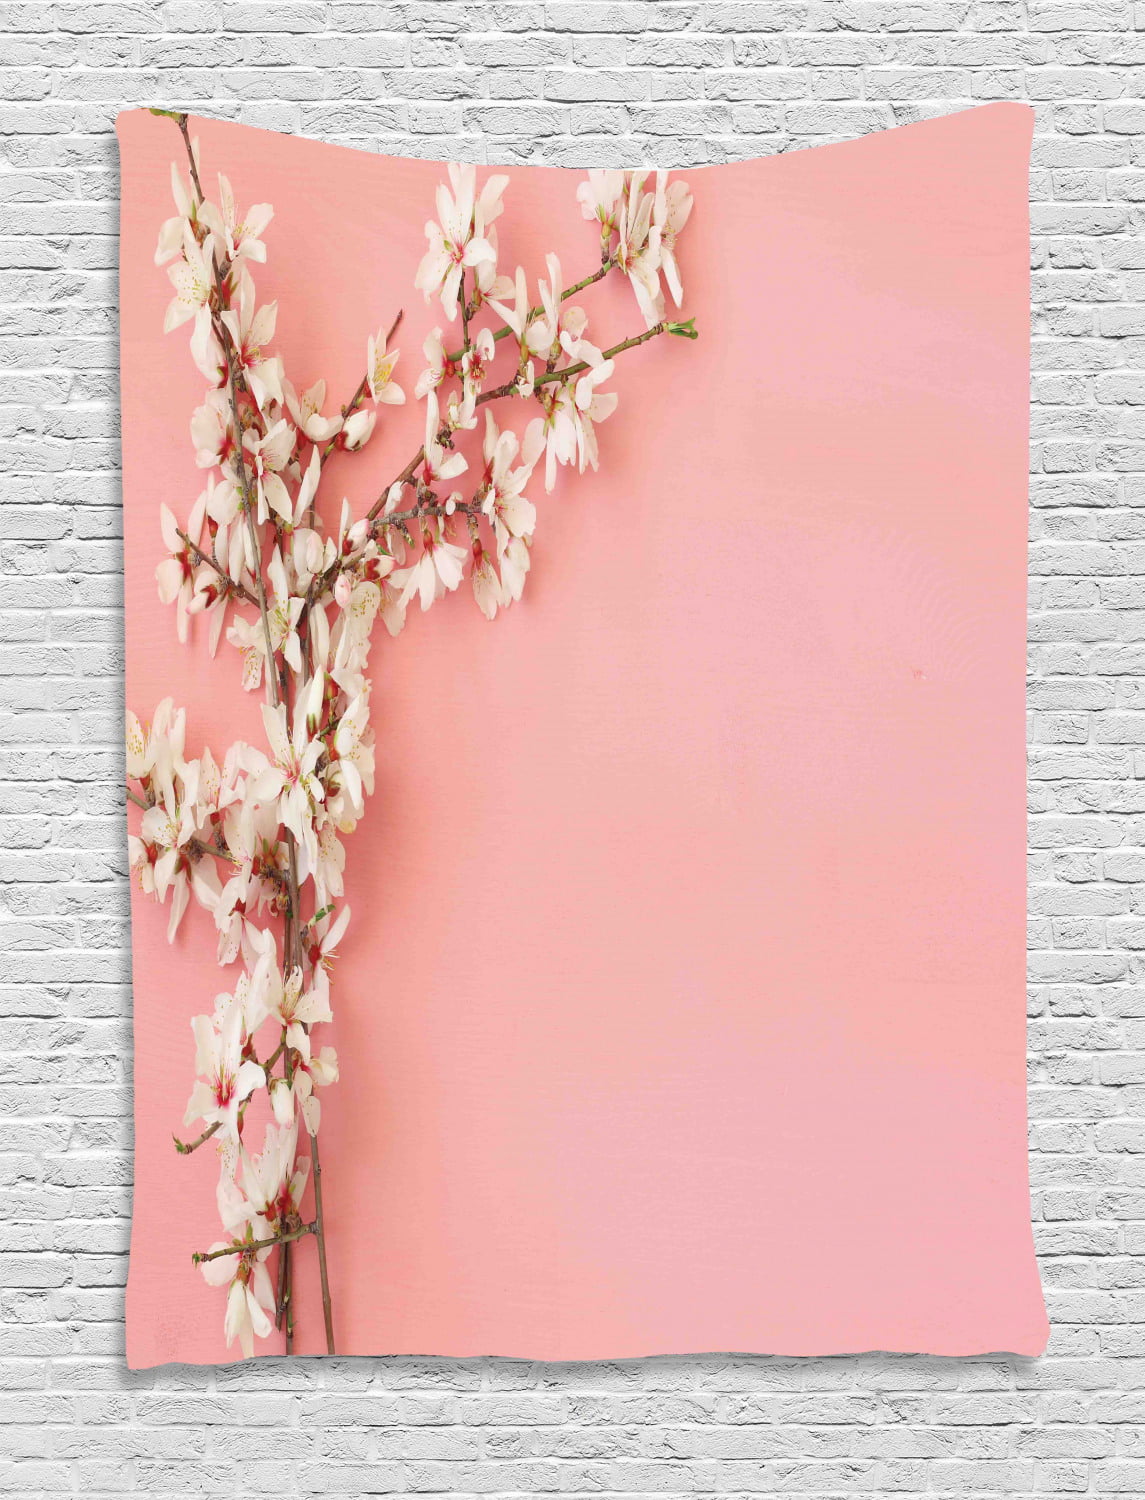 Cherry Blossom Spring Decorative Tapestry Tree Bedroom Living Room Wall Hanging 